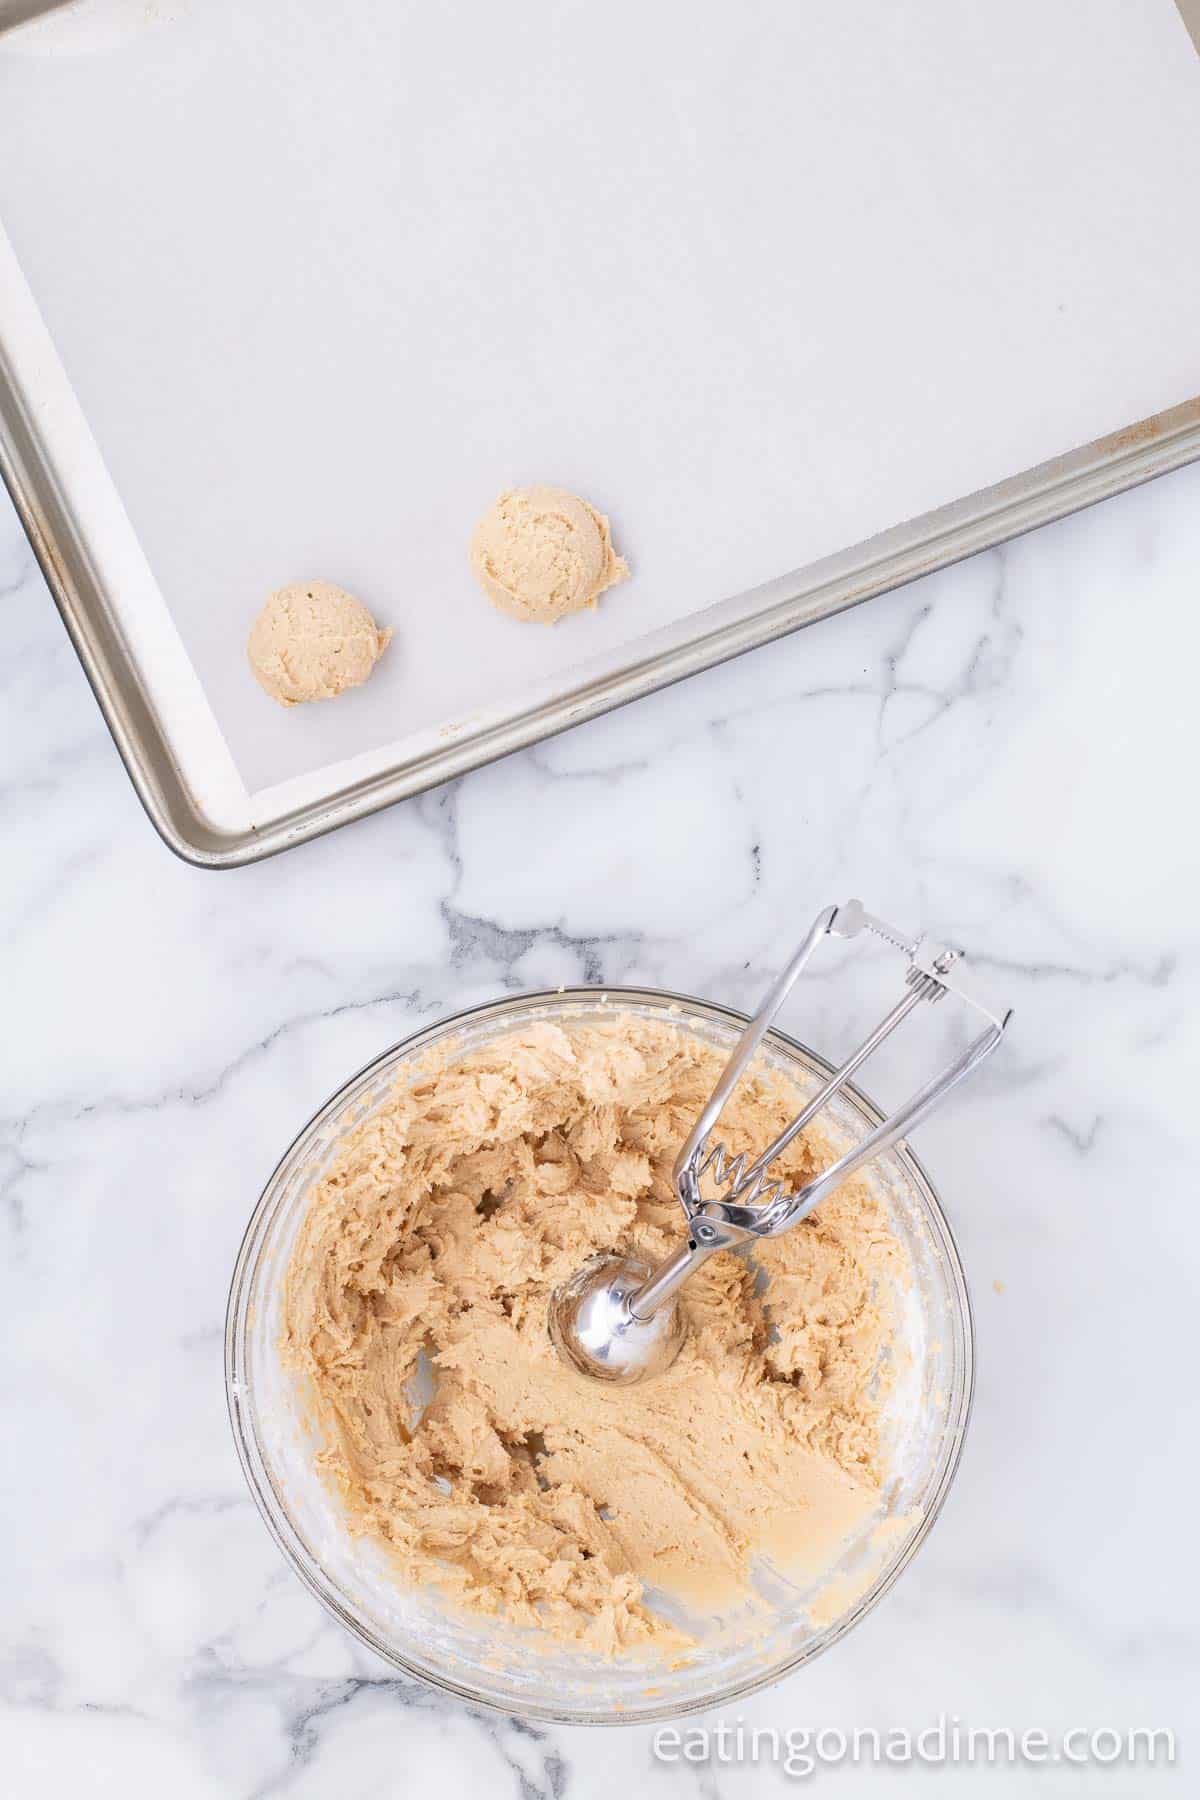 Scoop the dough onto baking sheet with cookie scoop